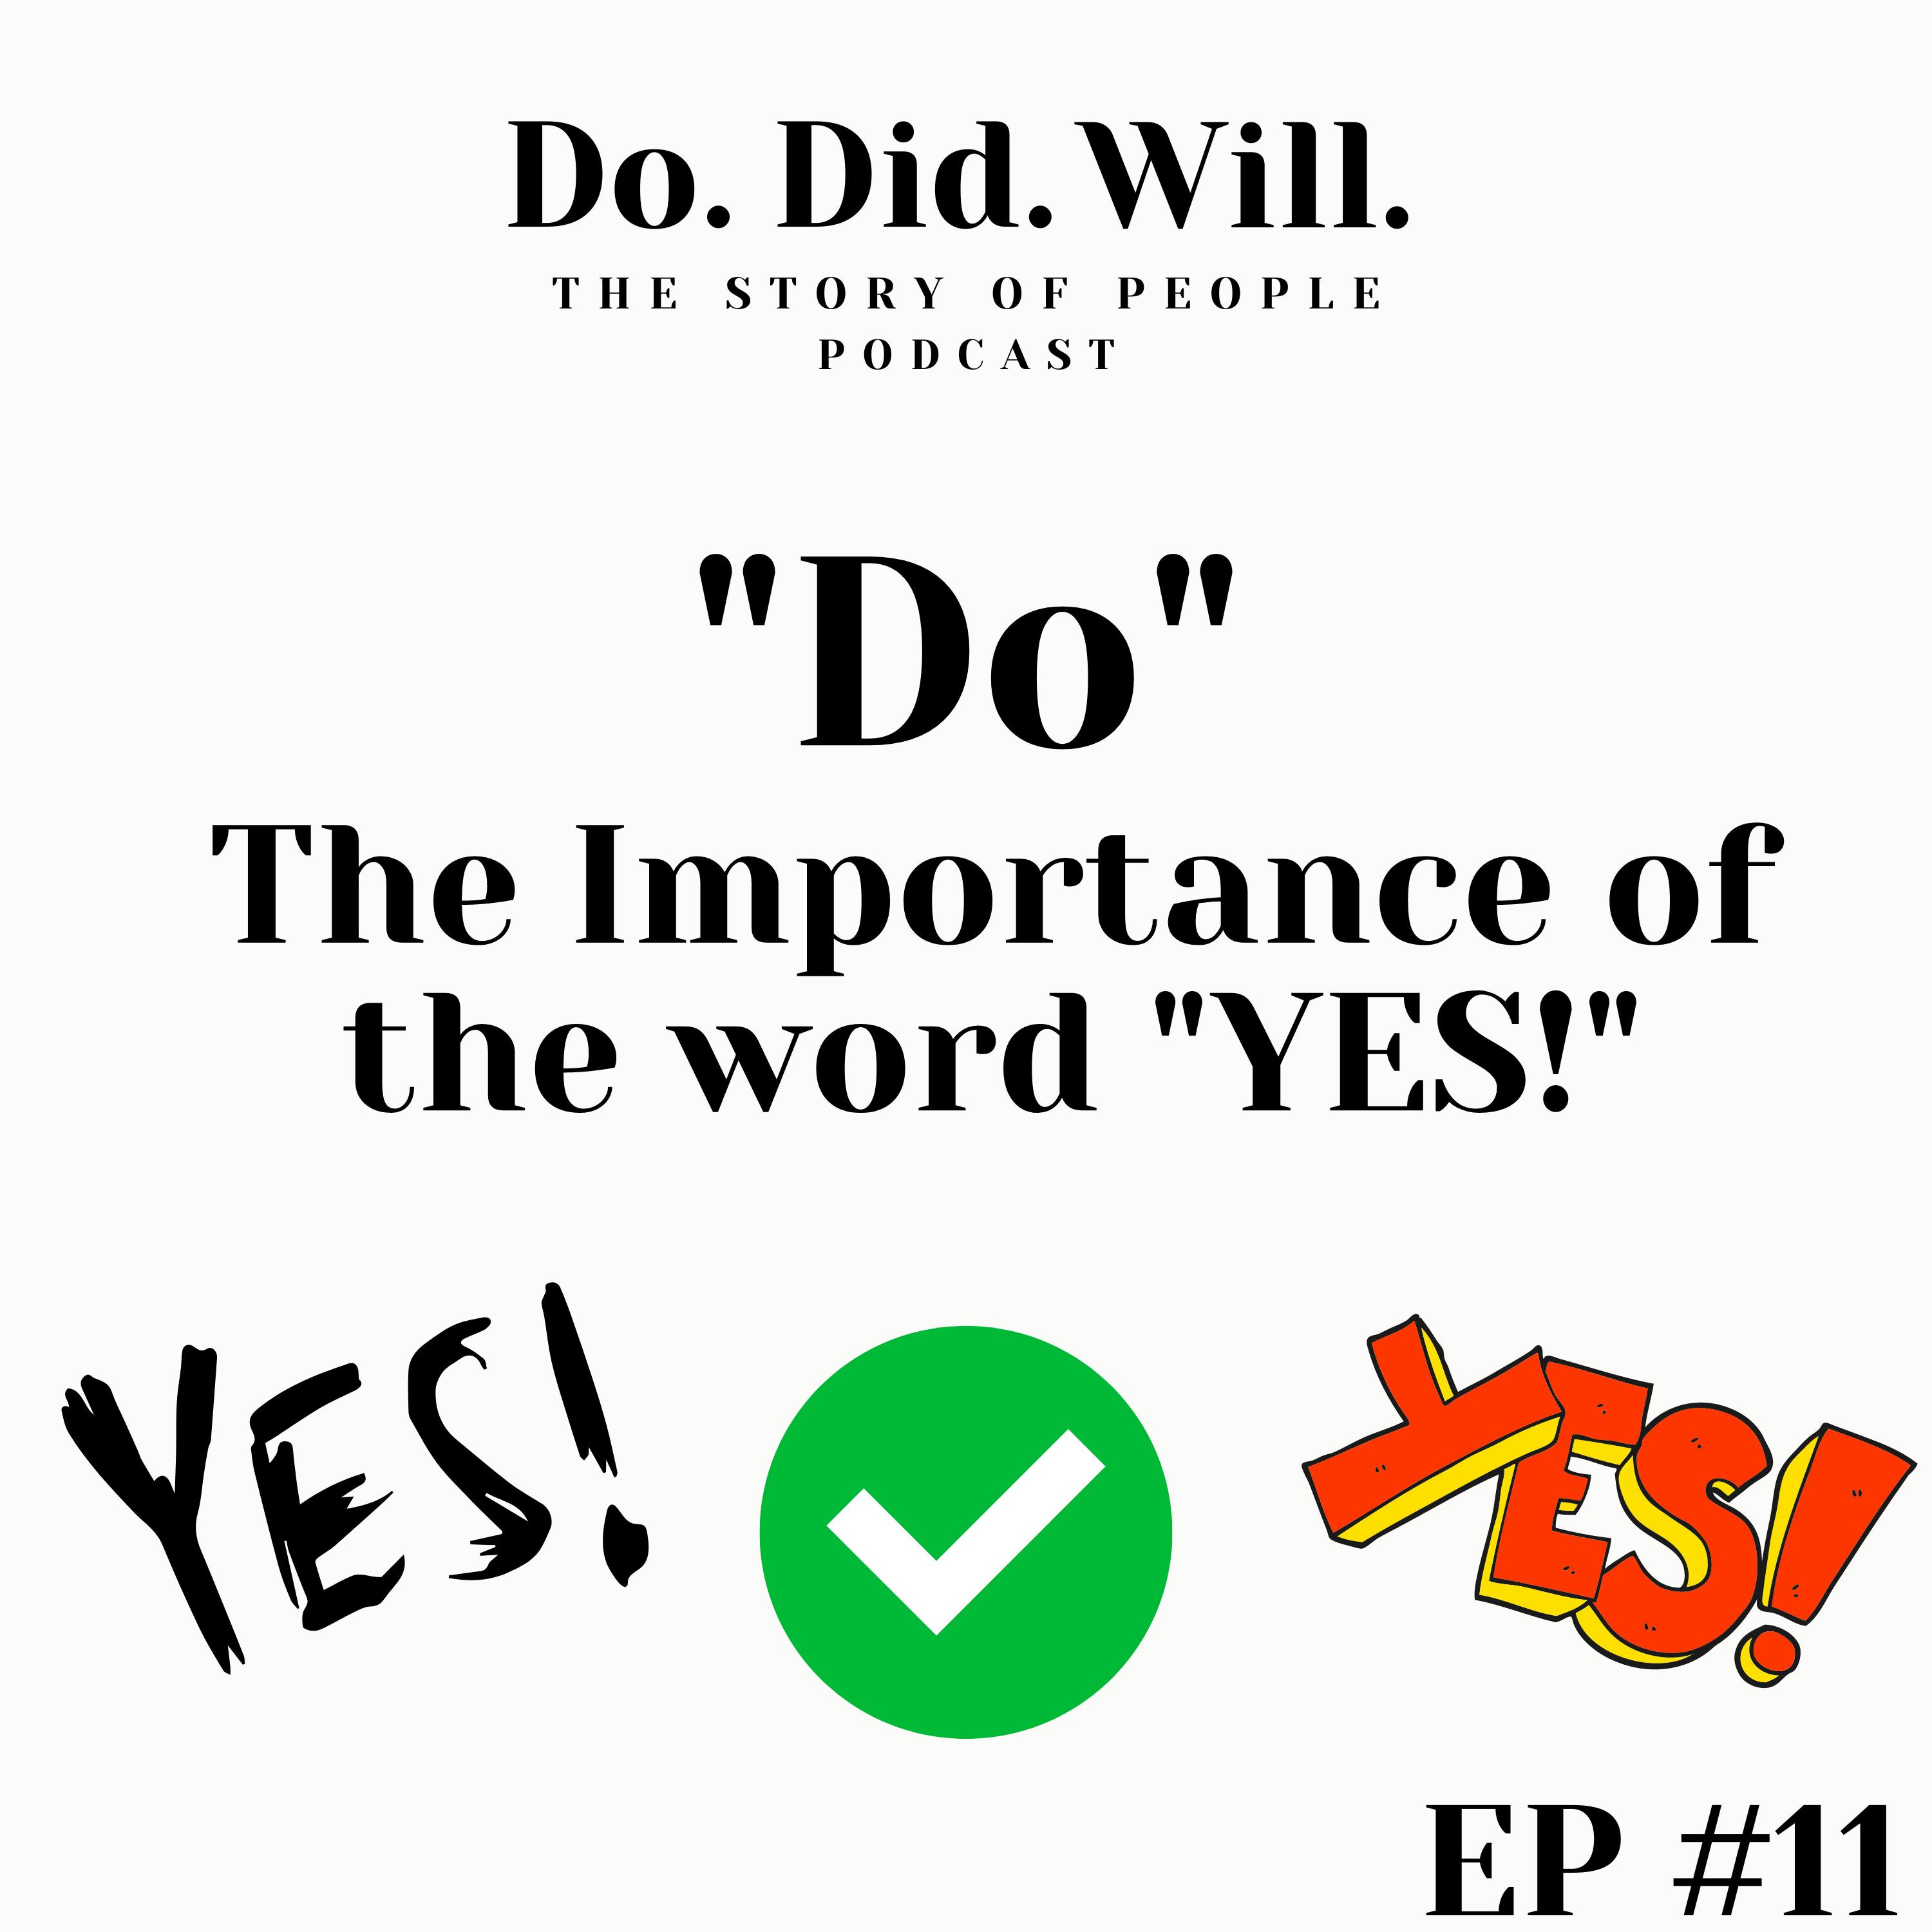 ”Do” - The Importance of the word ”Yes!”